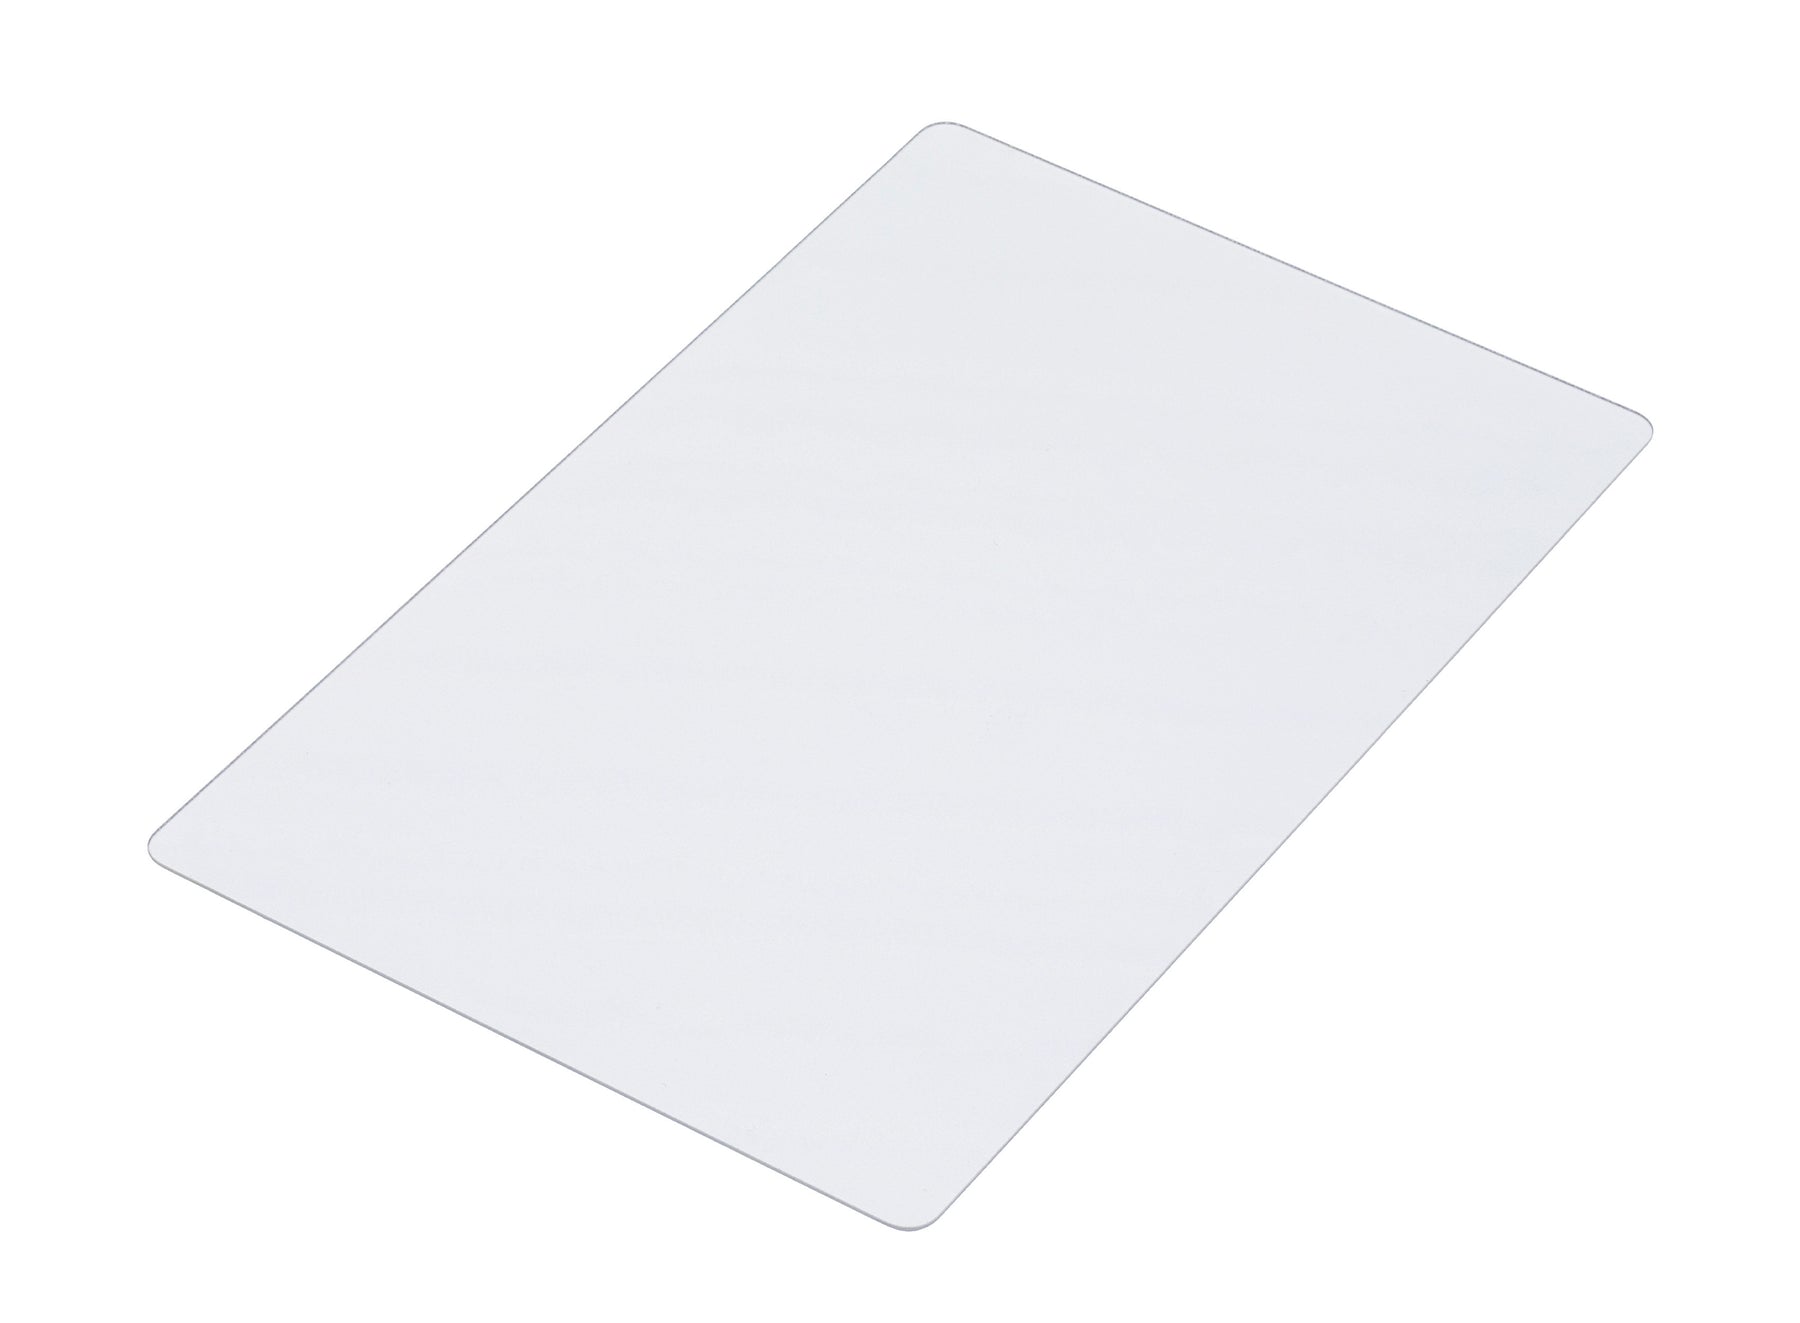 TRACKPAD (SILVER) COMPATIBLE WITH MACBOOK PRO 13 A2251 (MID 2020)